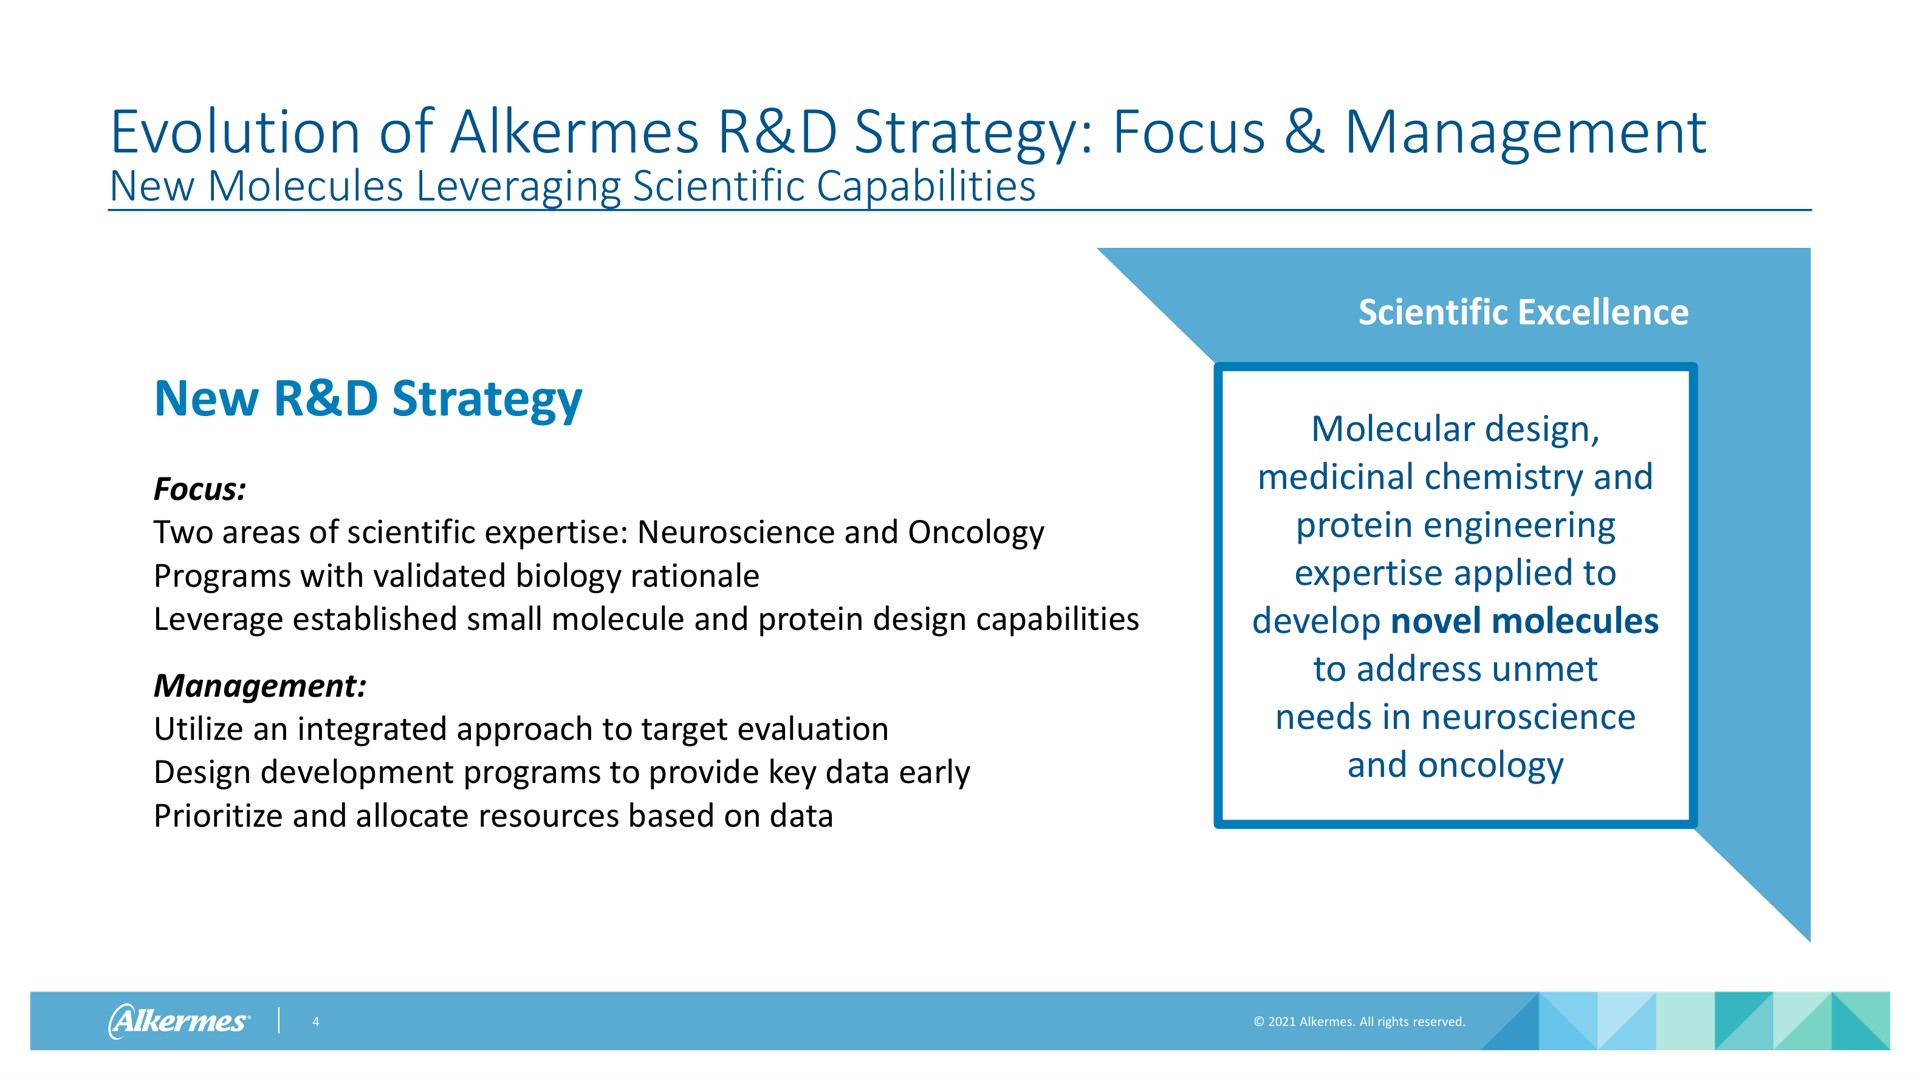 evolution of alkermes strategy focus management new molecules leveraging scientific capabilities new strategy focus two areas of scientific and oncology programs with validated biology rationale leverage established small molecule and protein design capabilities management utilize an integrated approach to target evaluation design development programs to provide key data early and allocate resources based on data scientific excellence molecular design medicinal chemistry and protein engineering applied to develop novel molecules to address unmet needs in and oncology by | Alkermes